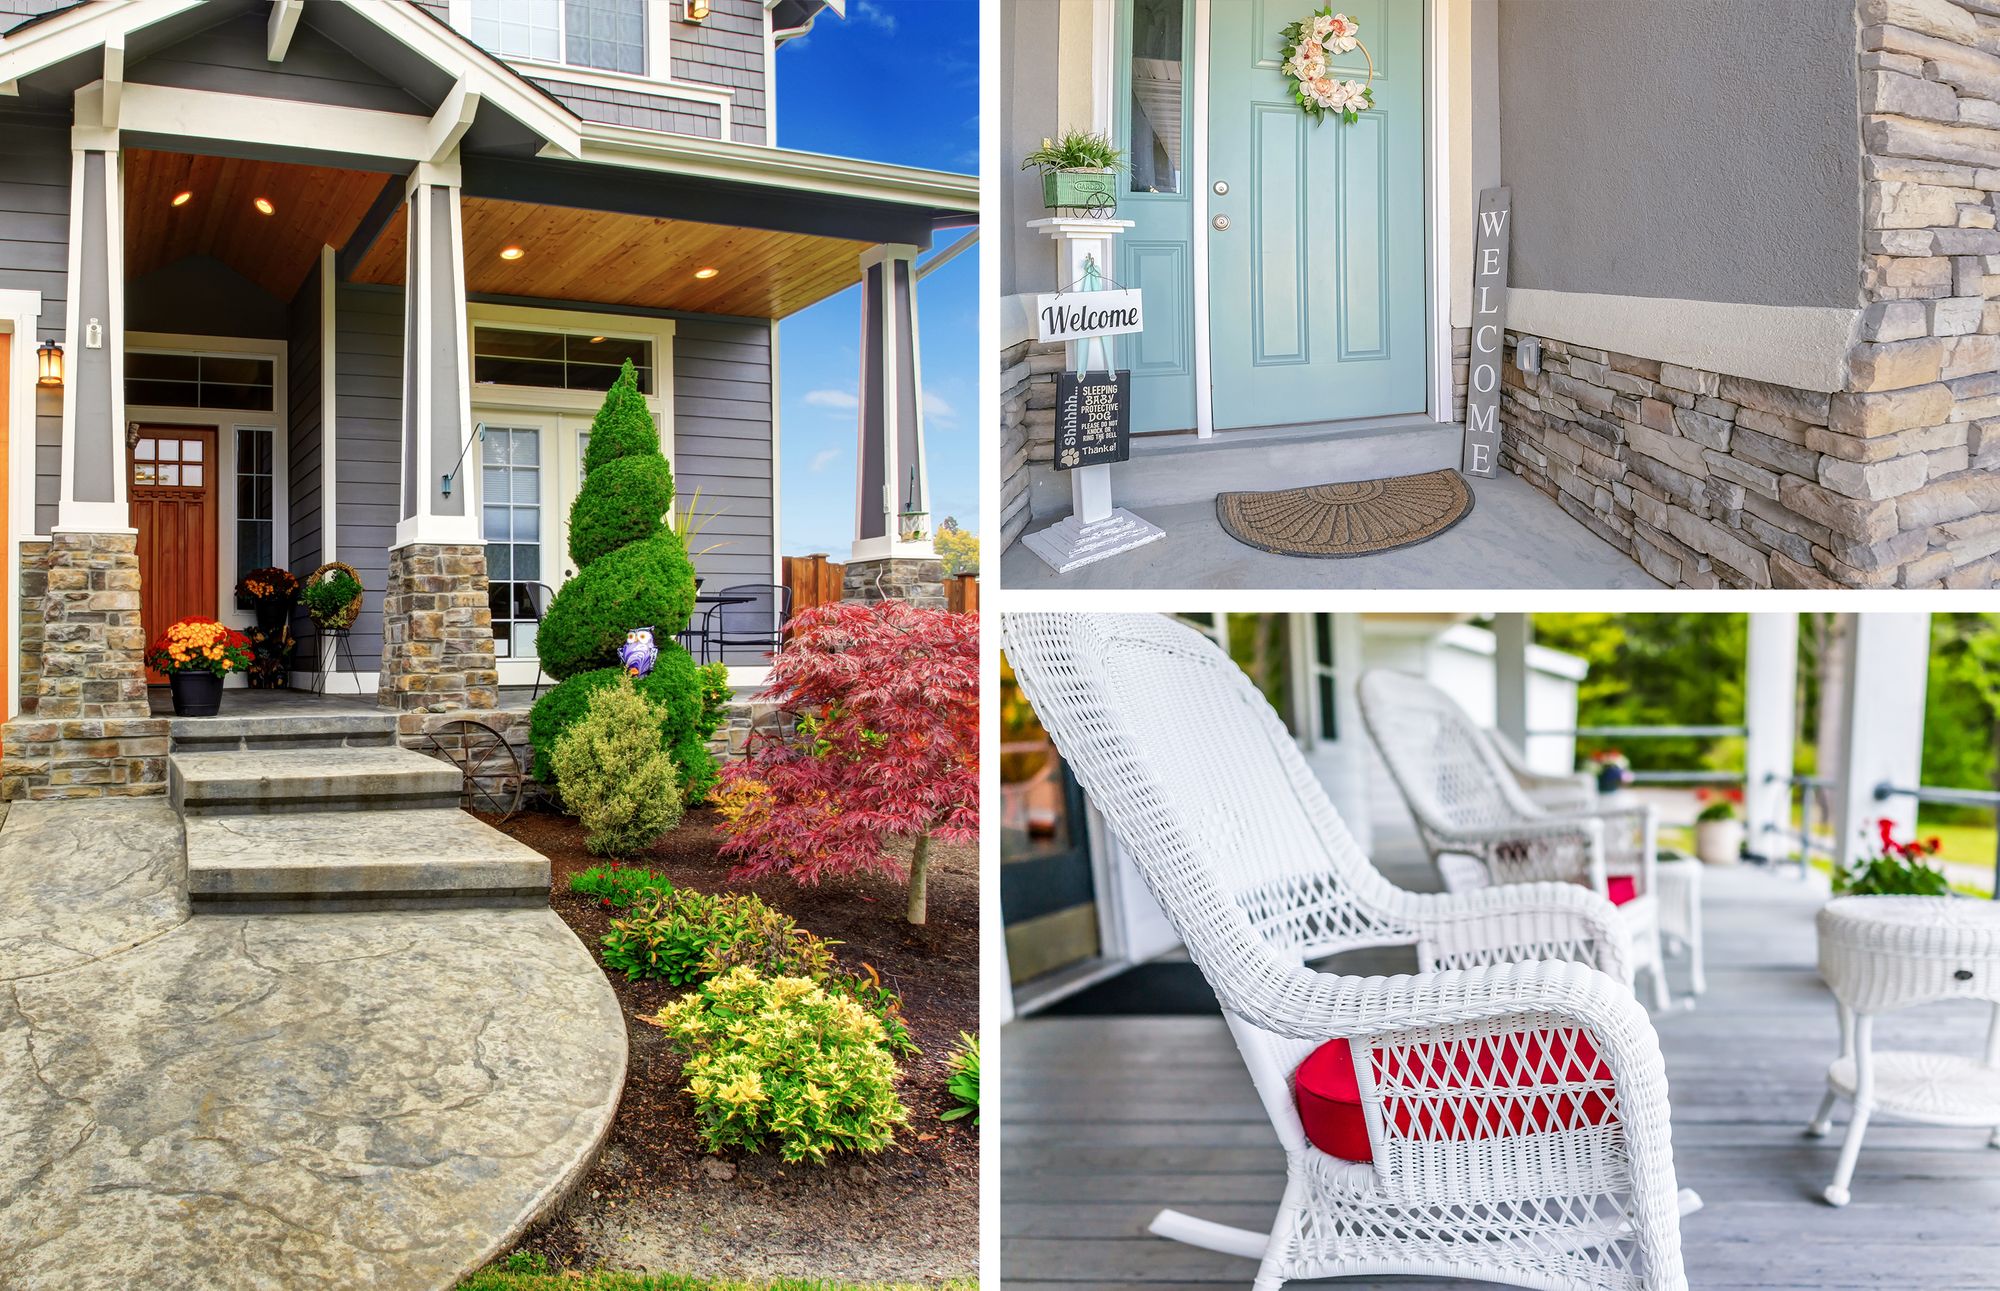 Before You Sell: 5 Easy Curb Appeal Improvements To Help Fetch Top Dollar